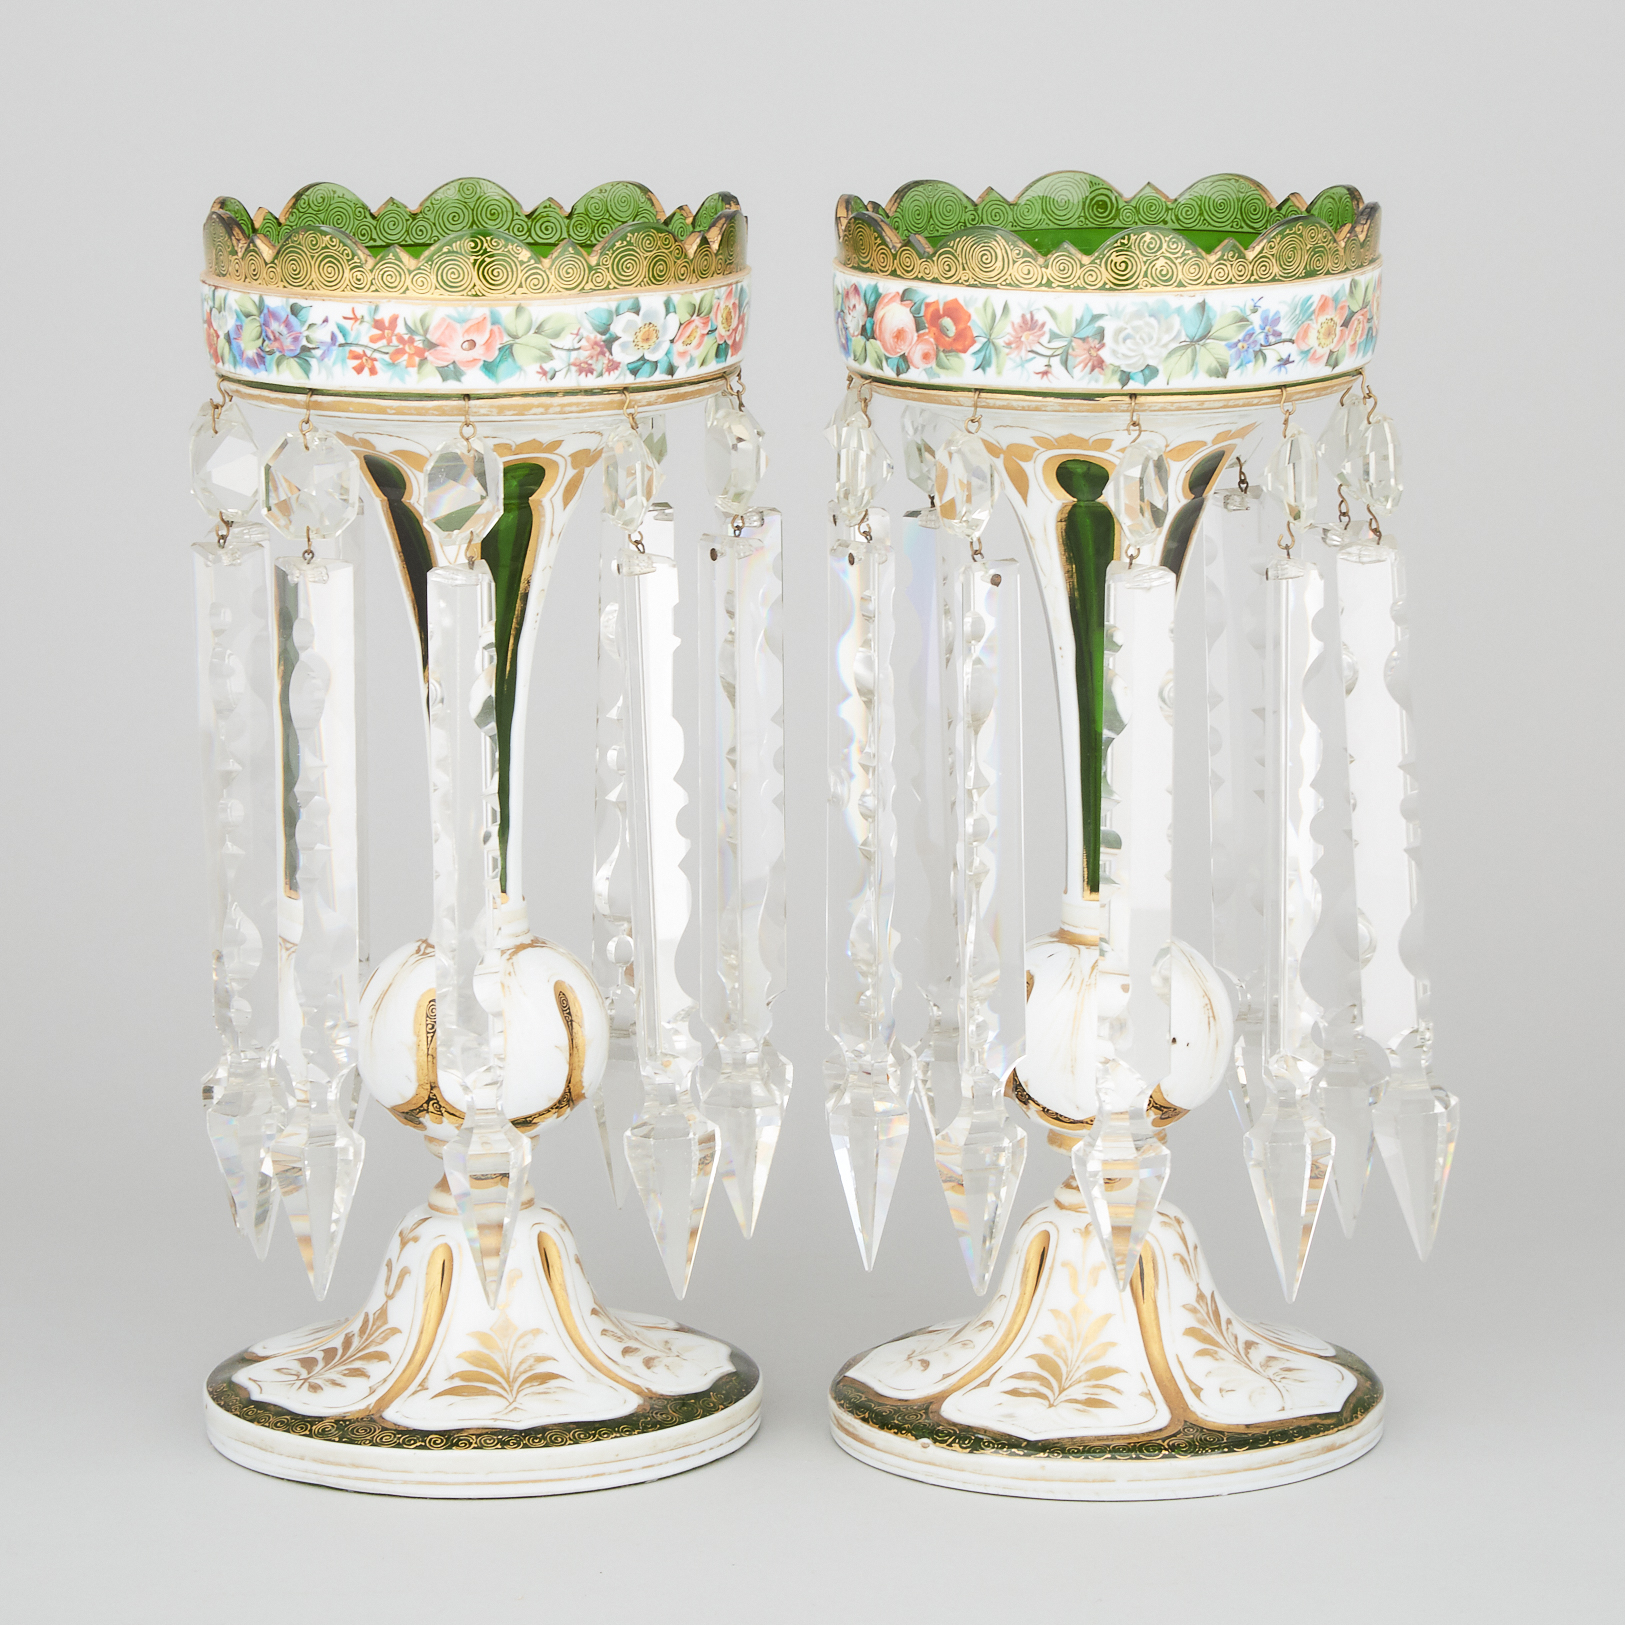 Pair of Bohemian Overlaid and Enameled Green Glass Lustres, late 19th/early 20th century